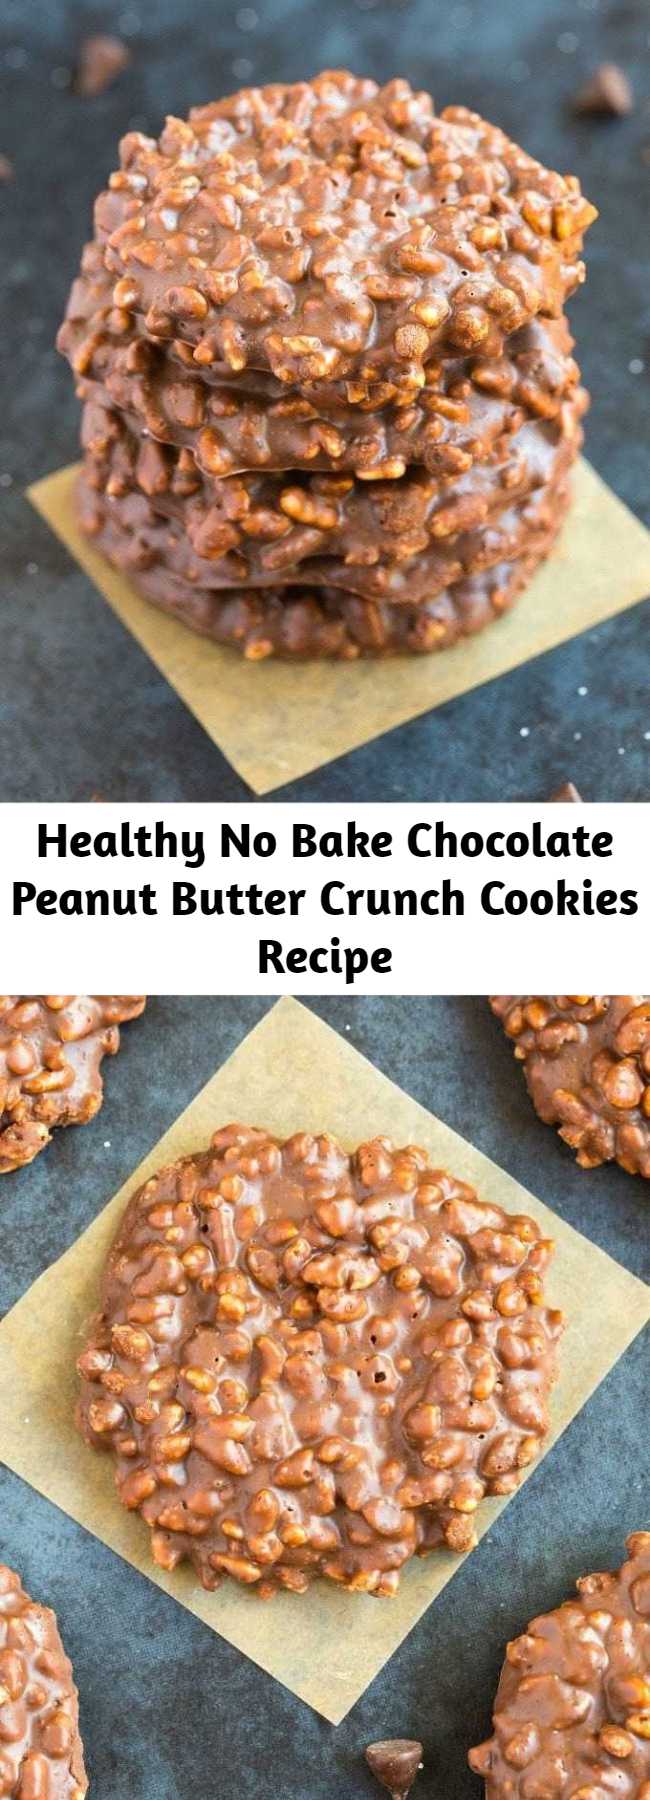 Healthy No Bake Chocolate Peanut Butter Crunch Cookies Recipe - Healthy No Bake Chocolate Peanut butter crunch cookies using just one bowl, 5 ingredients and less than 2 minutes! Easy, fool-proof drop cookies which are naturally gluten free, vegan, dairy free and sugar free!